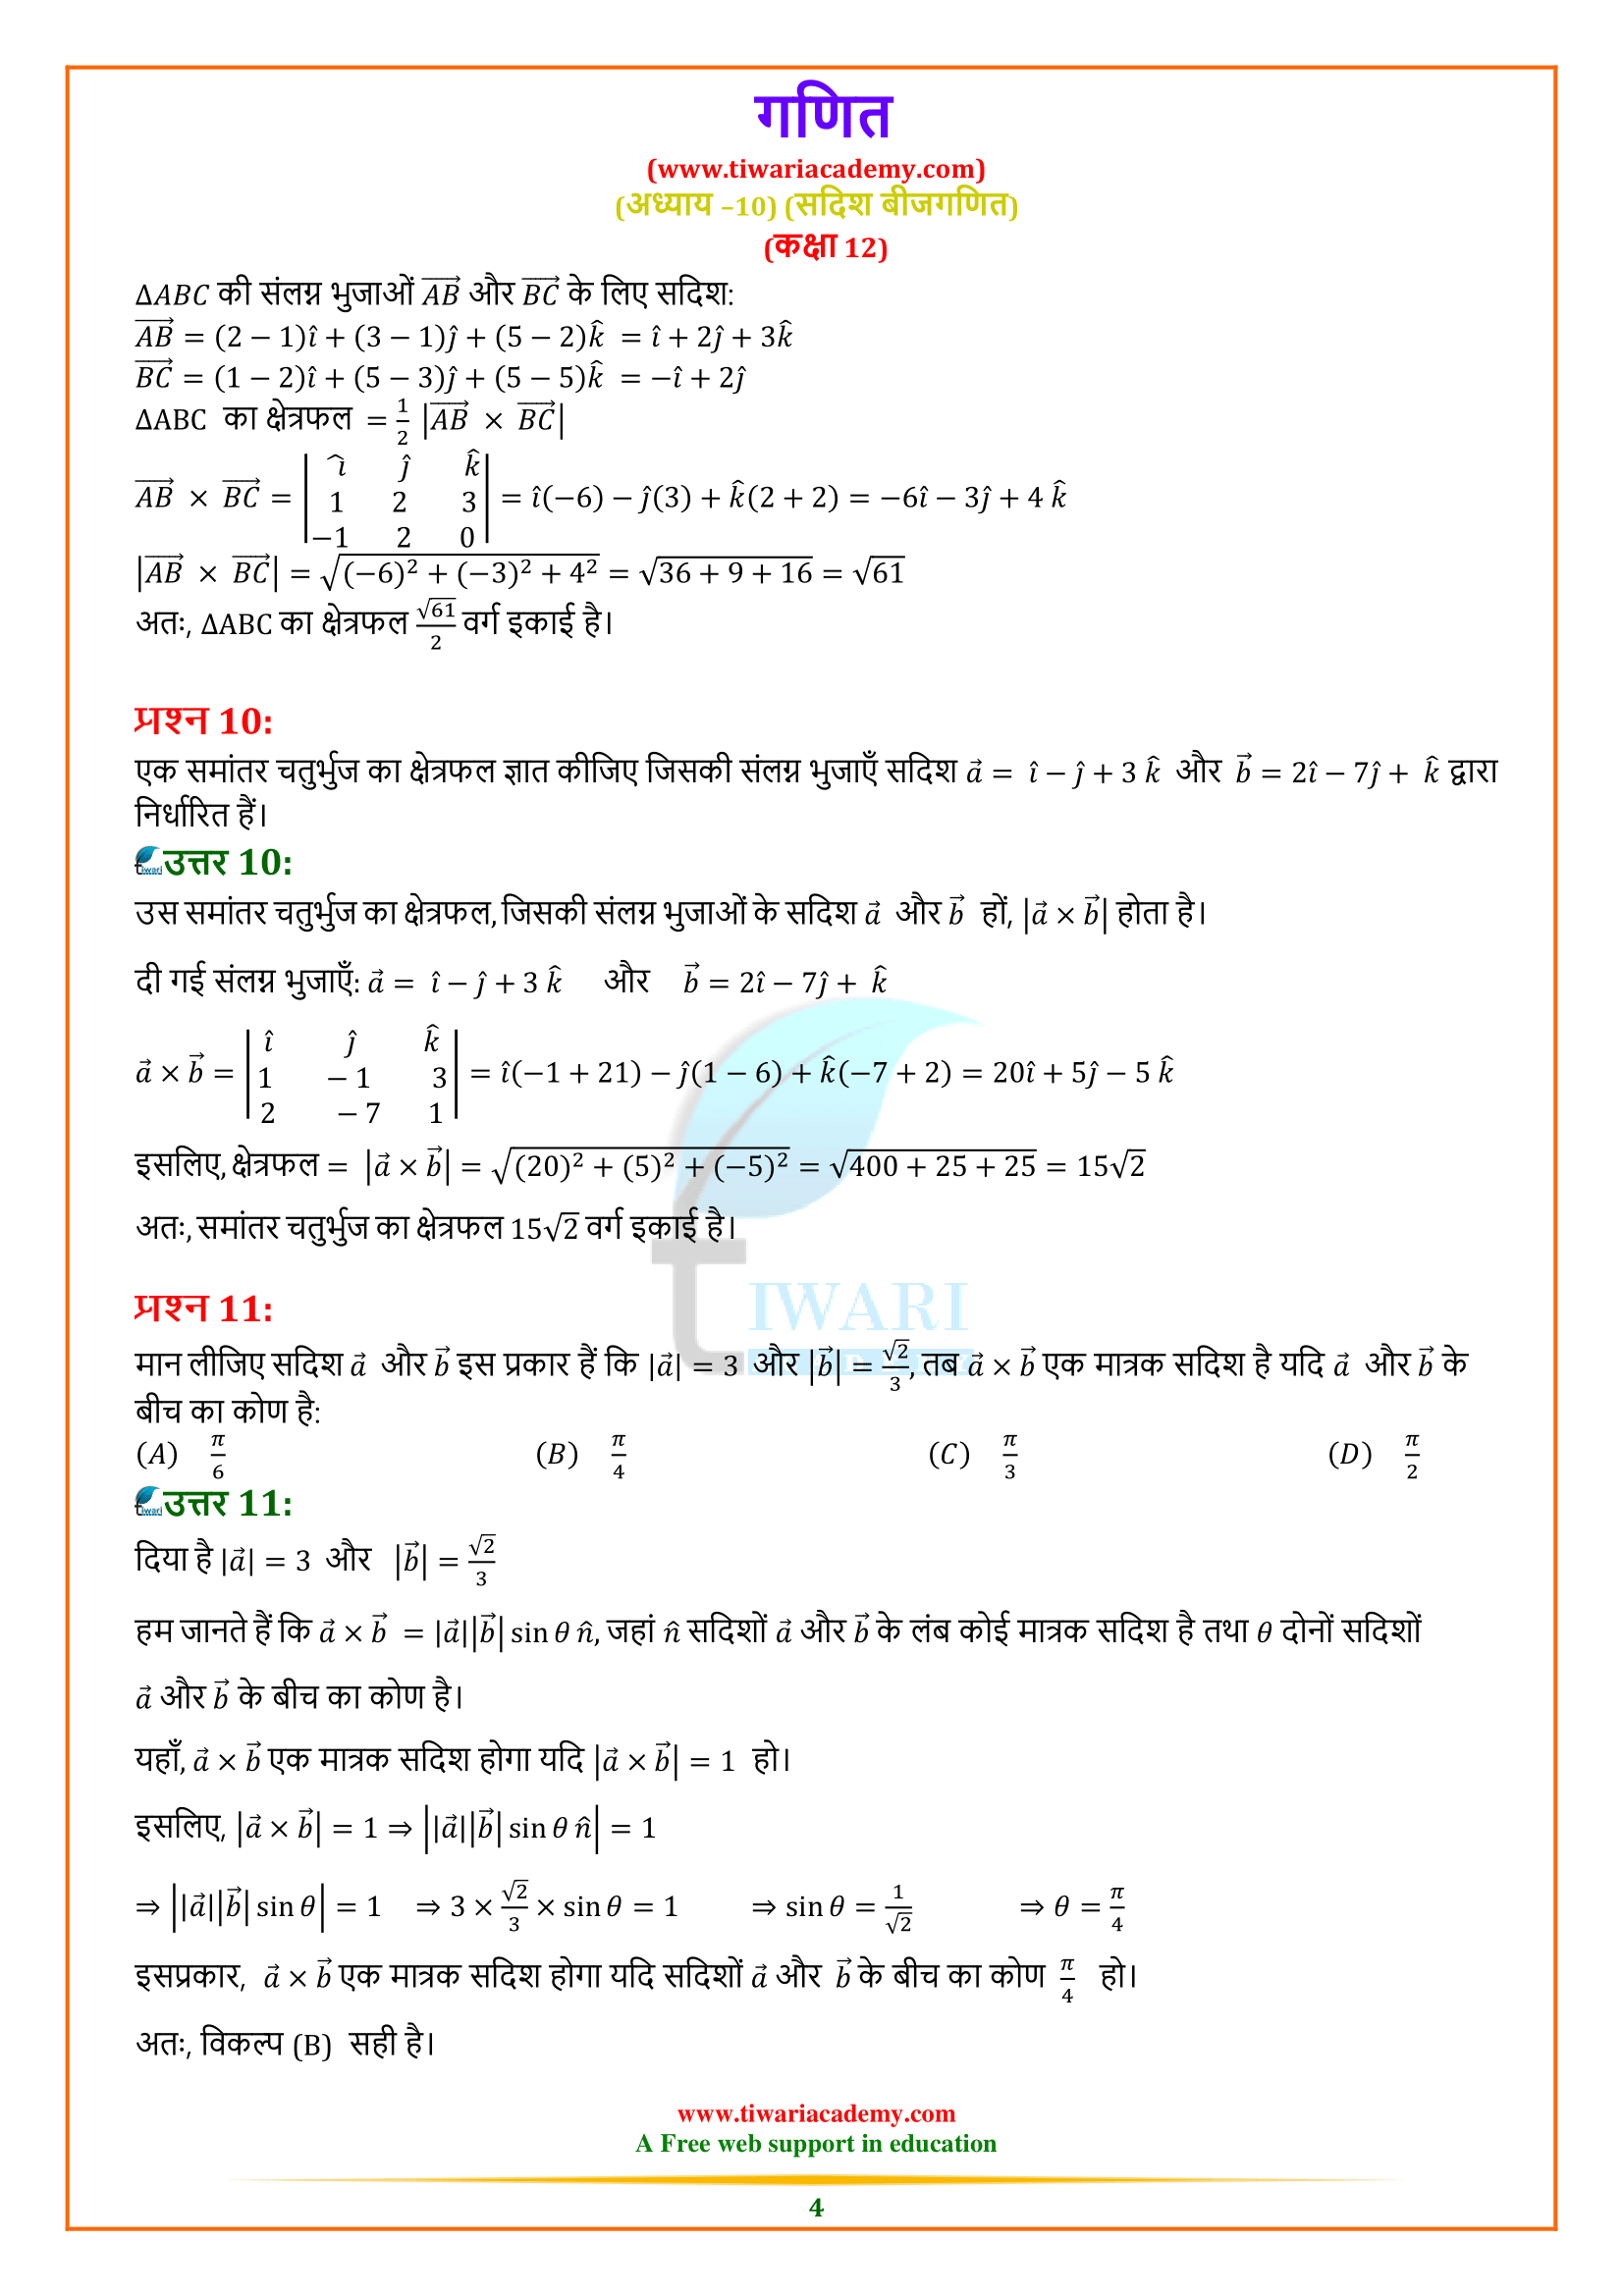 NCERT Solutions for Class 12 Maths Exercise 10.4 in Hindi Medium for +2